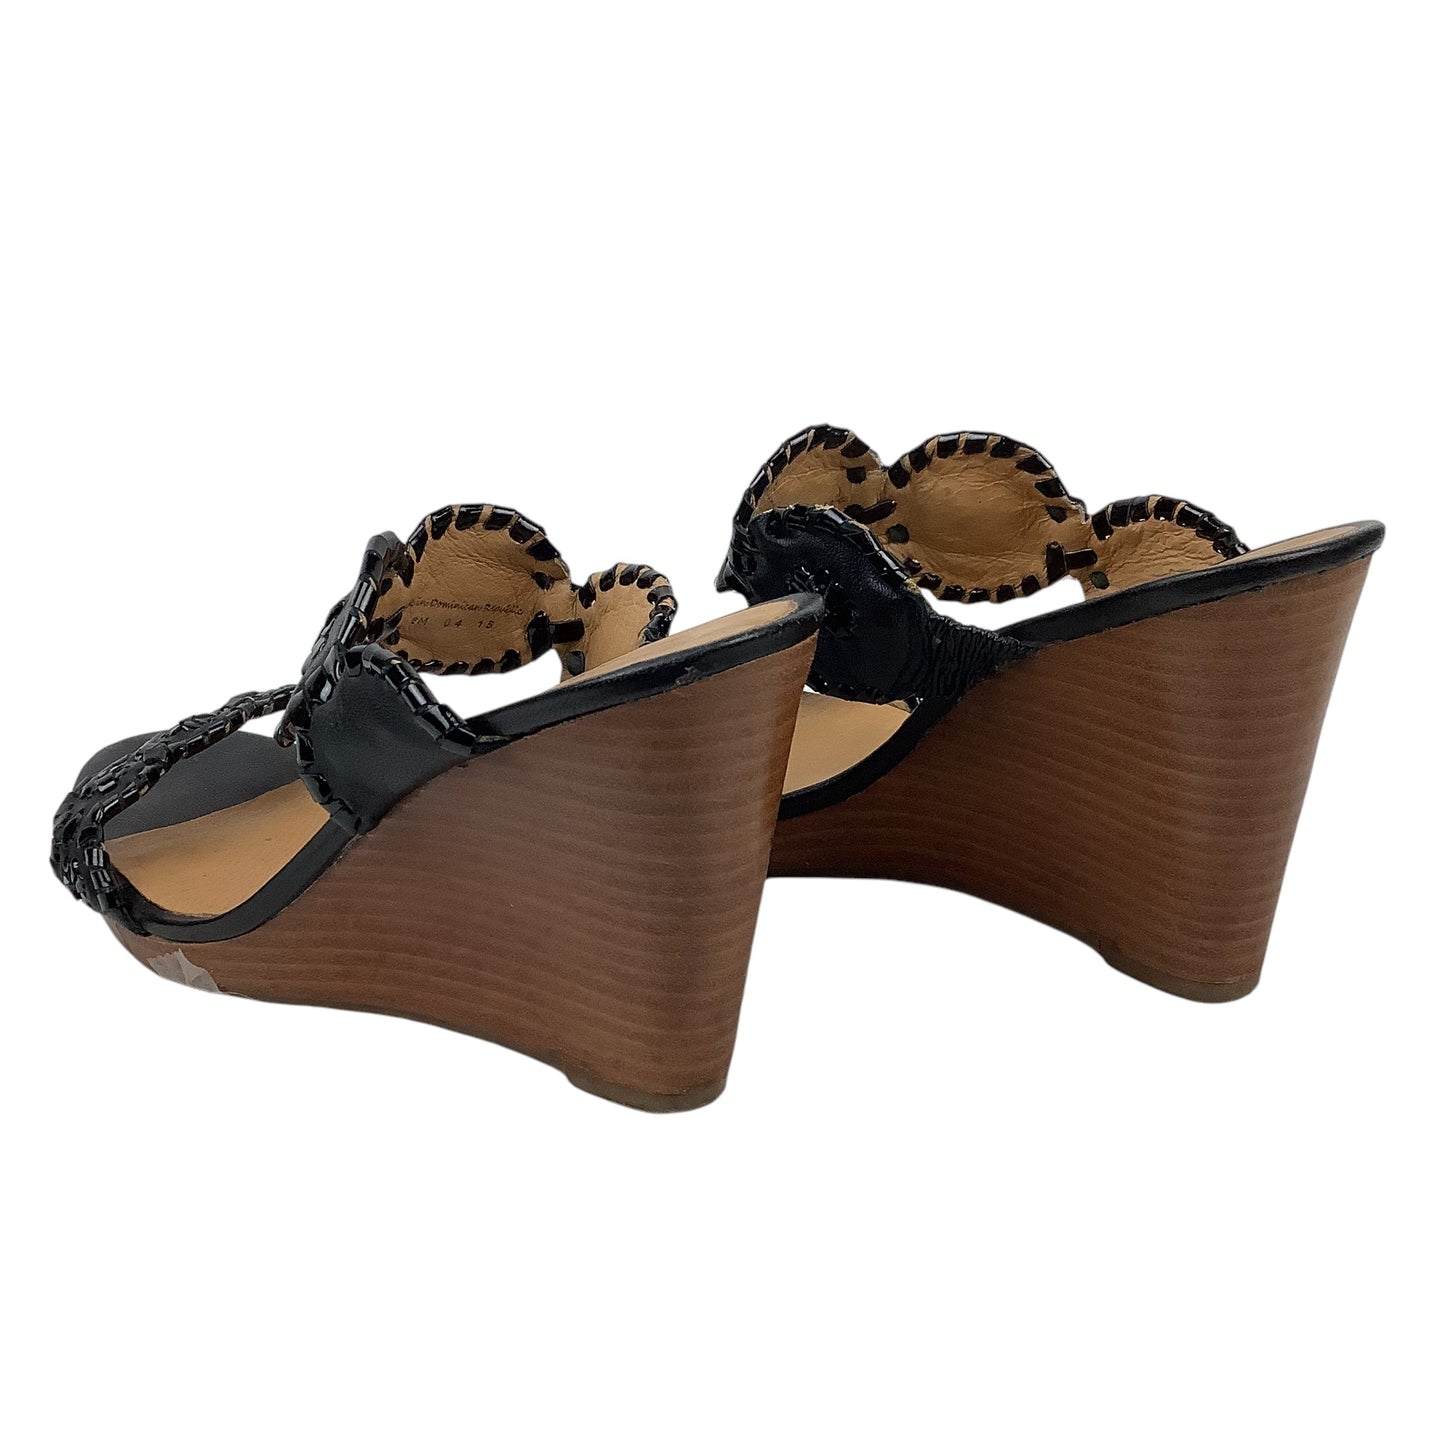 Sandals Heels Wedge By Jack Rogers  Size: 8